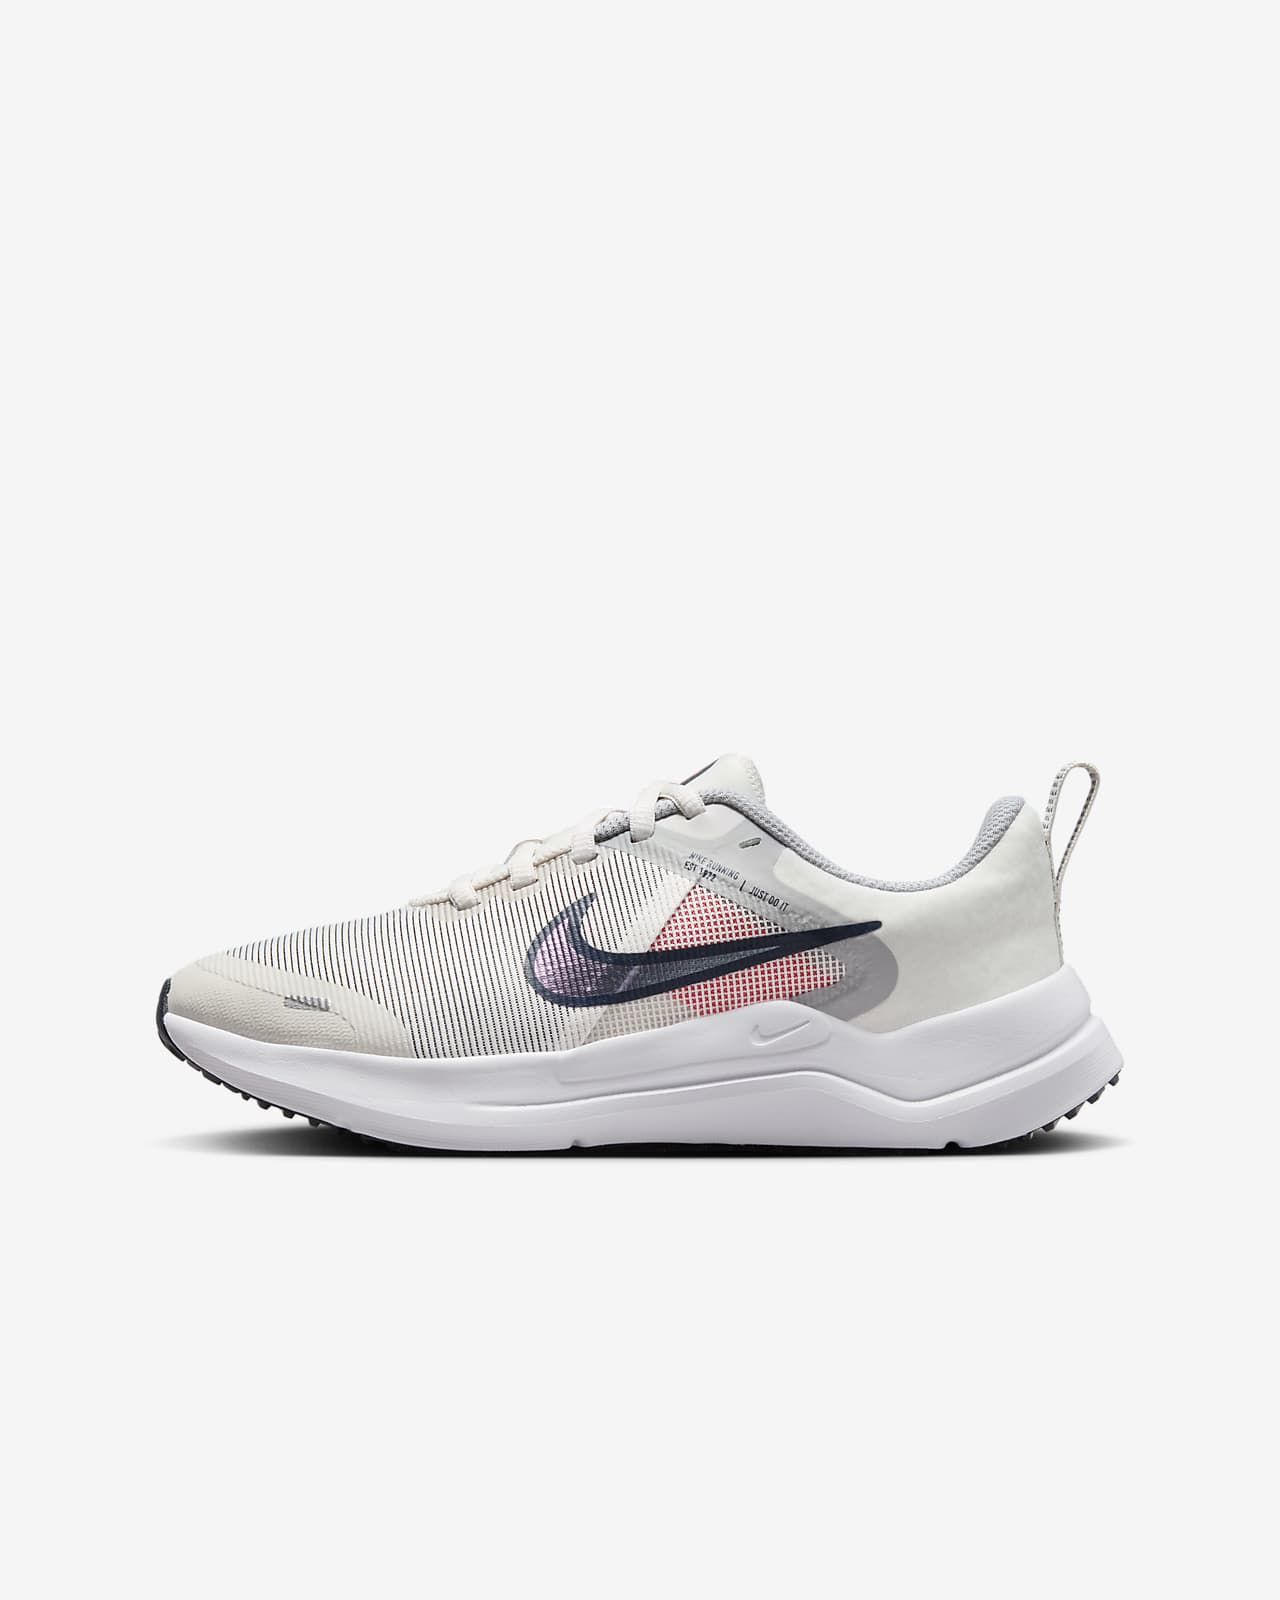 The Best Nike Shoes for Toddlers and Kids. Nike SI